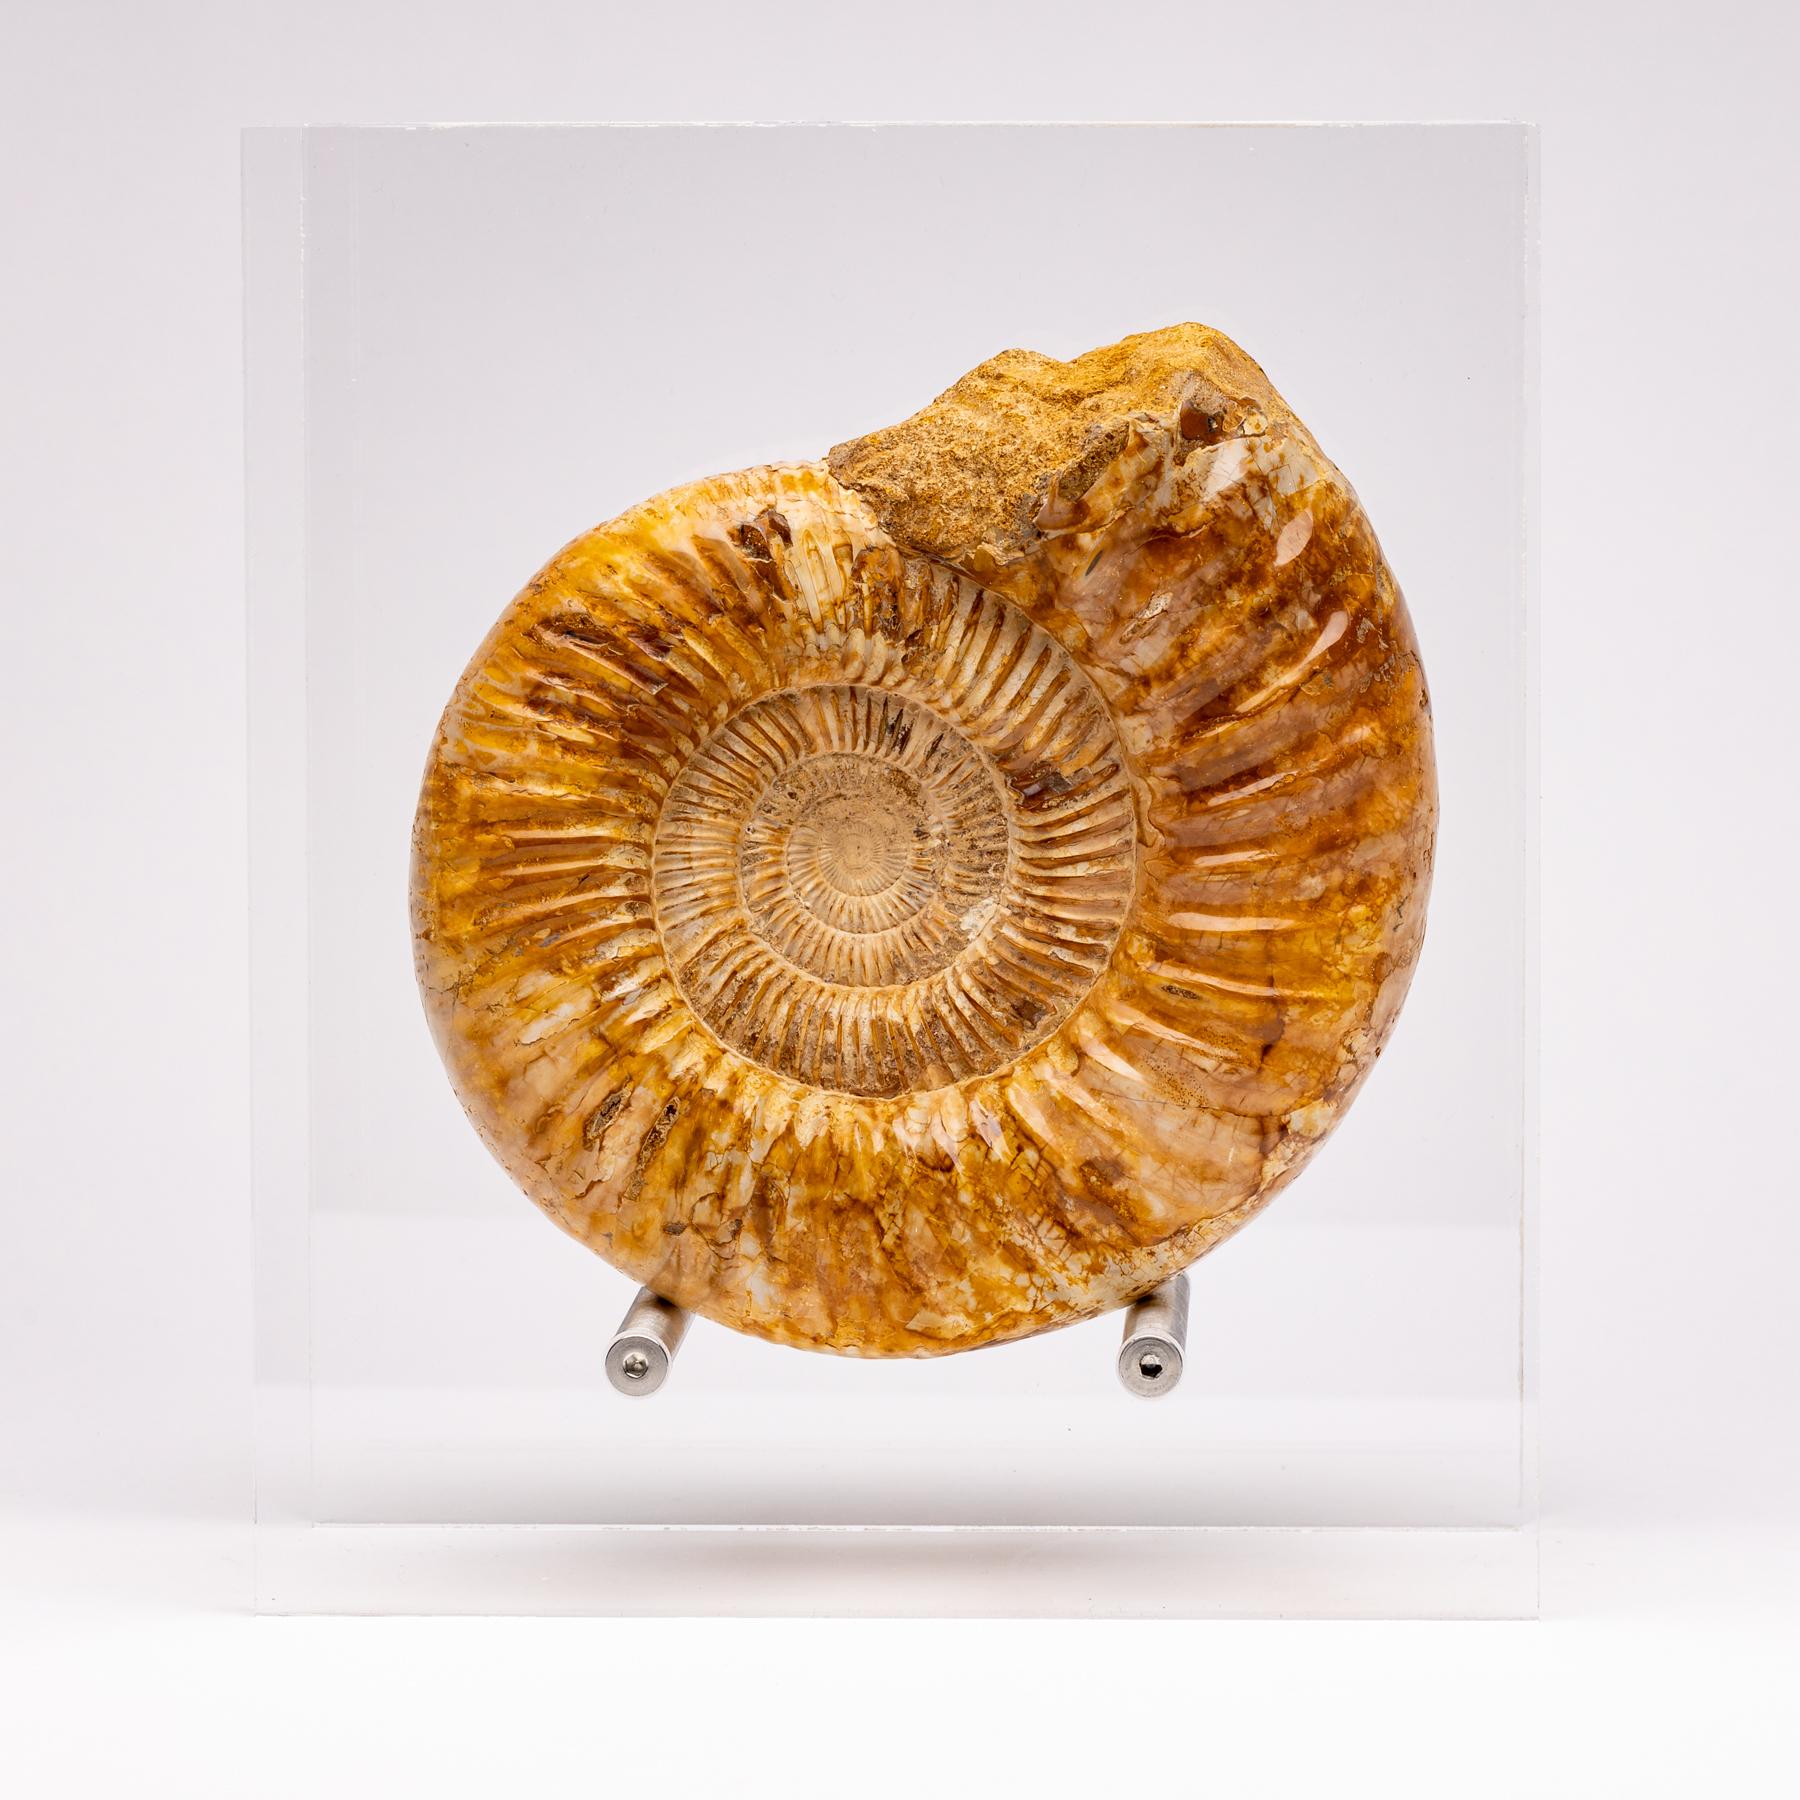 Perisphinctes Ammonite
Period: Jurassic 163 - 145 Million years ago.
These ammonites could grow from anywhere between 10 mm to over a meter in diameter, making them among the largest of the ammonites.
Ammonites were squid-like predatory creatures